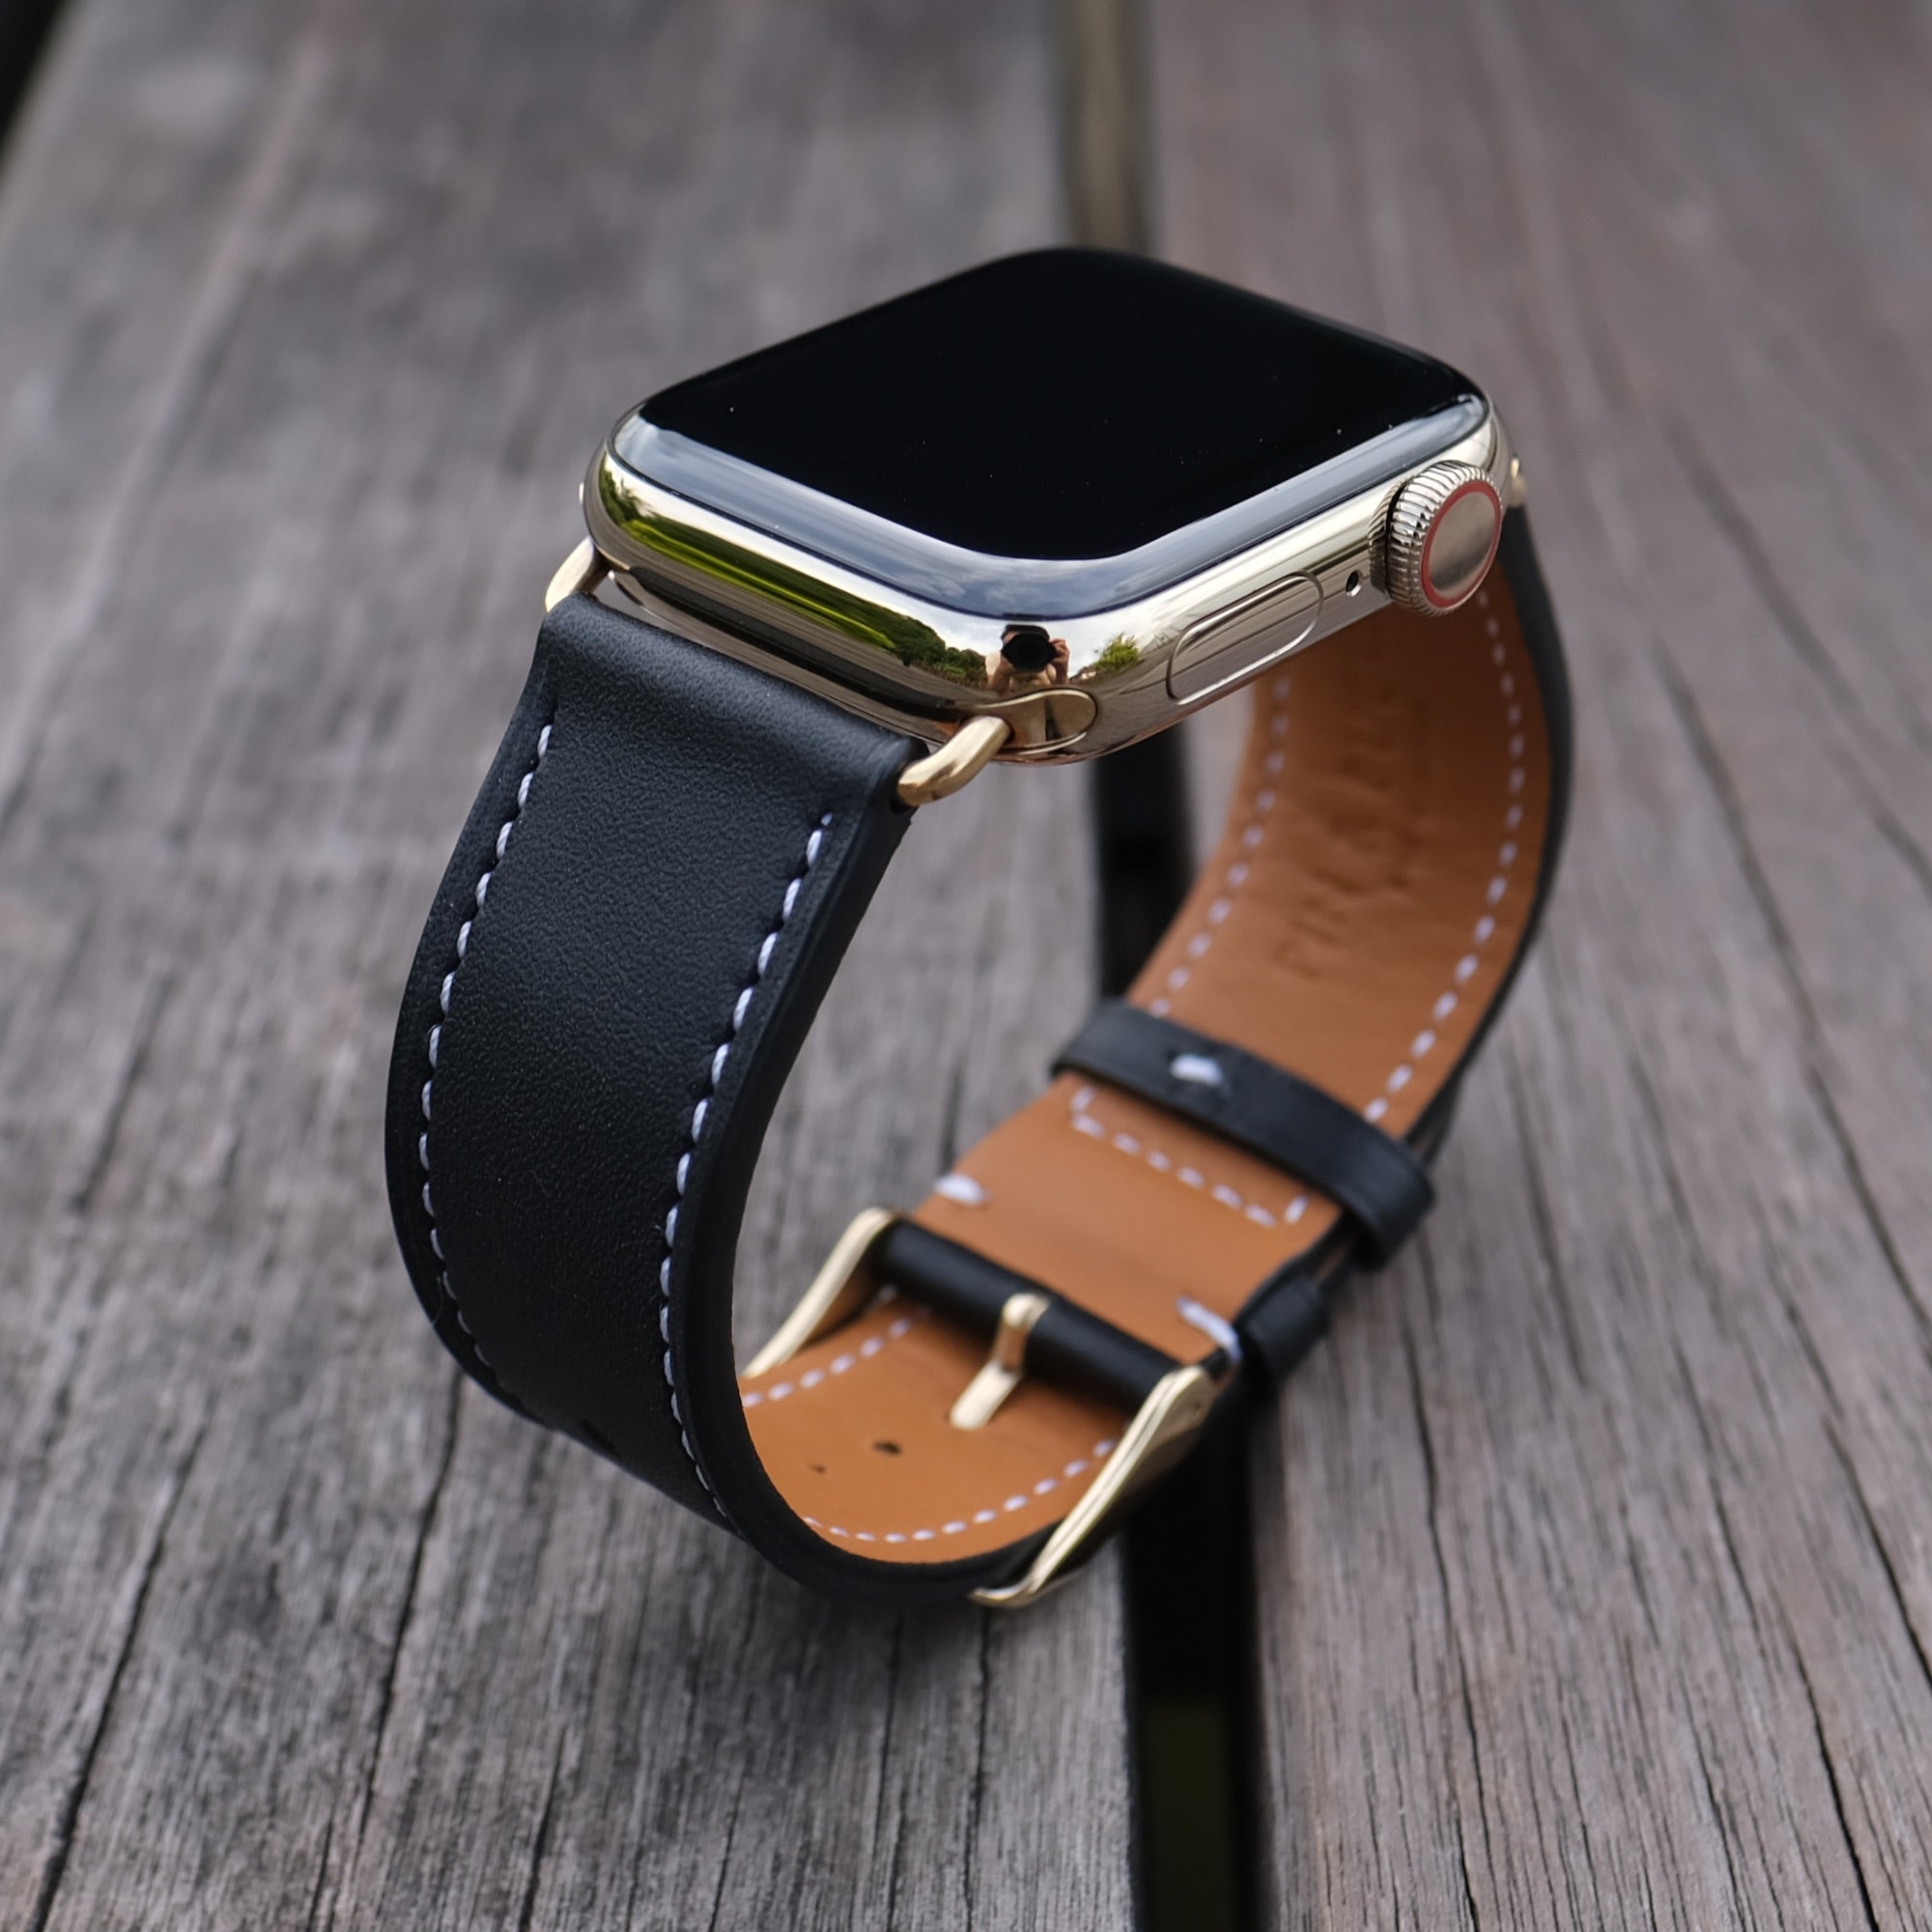 Barenia Leather Apple Watch Bands by Pin & Buckle - Black - Gold Series 6 and 7 Stainless Steel Hardware